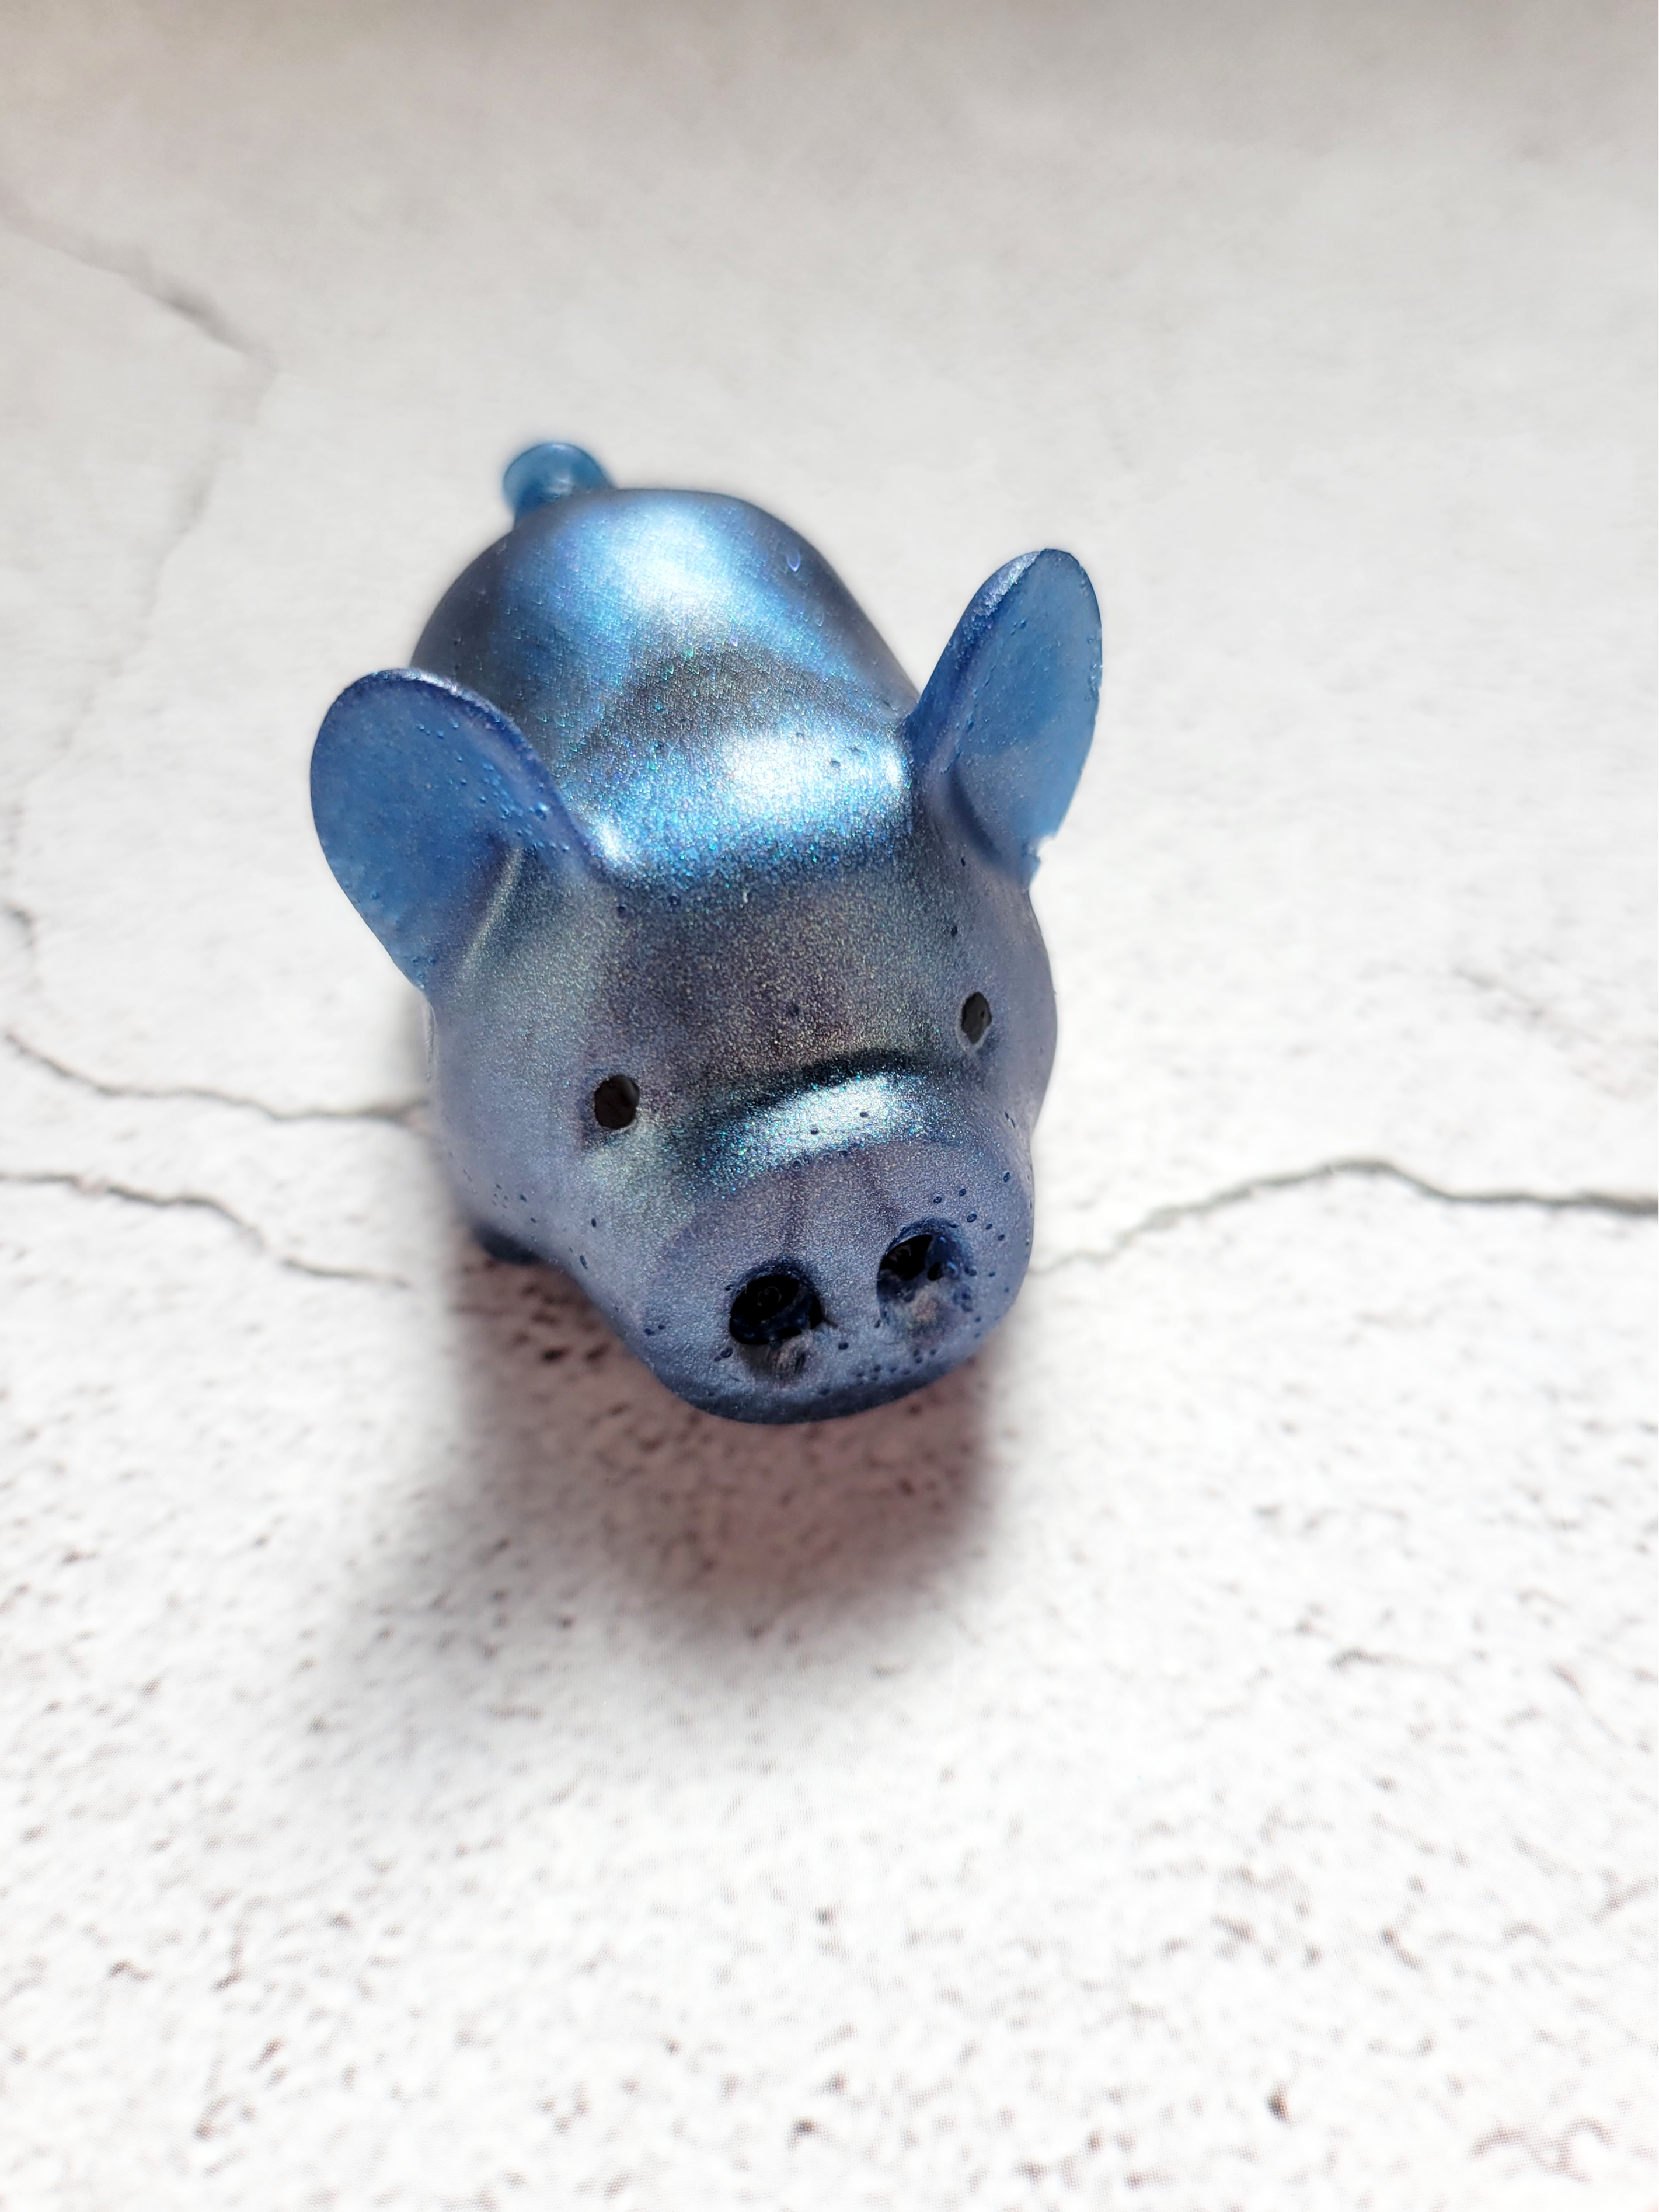 A front view of a fat pig figure. He's got black painted eyes and nostrils. He's a deep blue color.